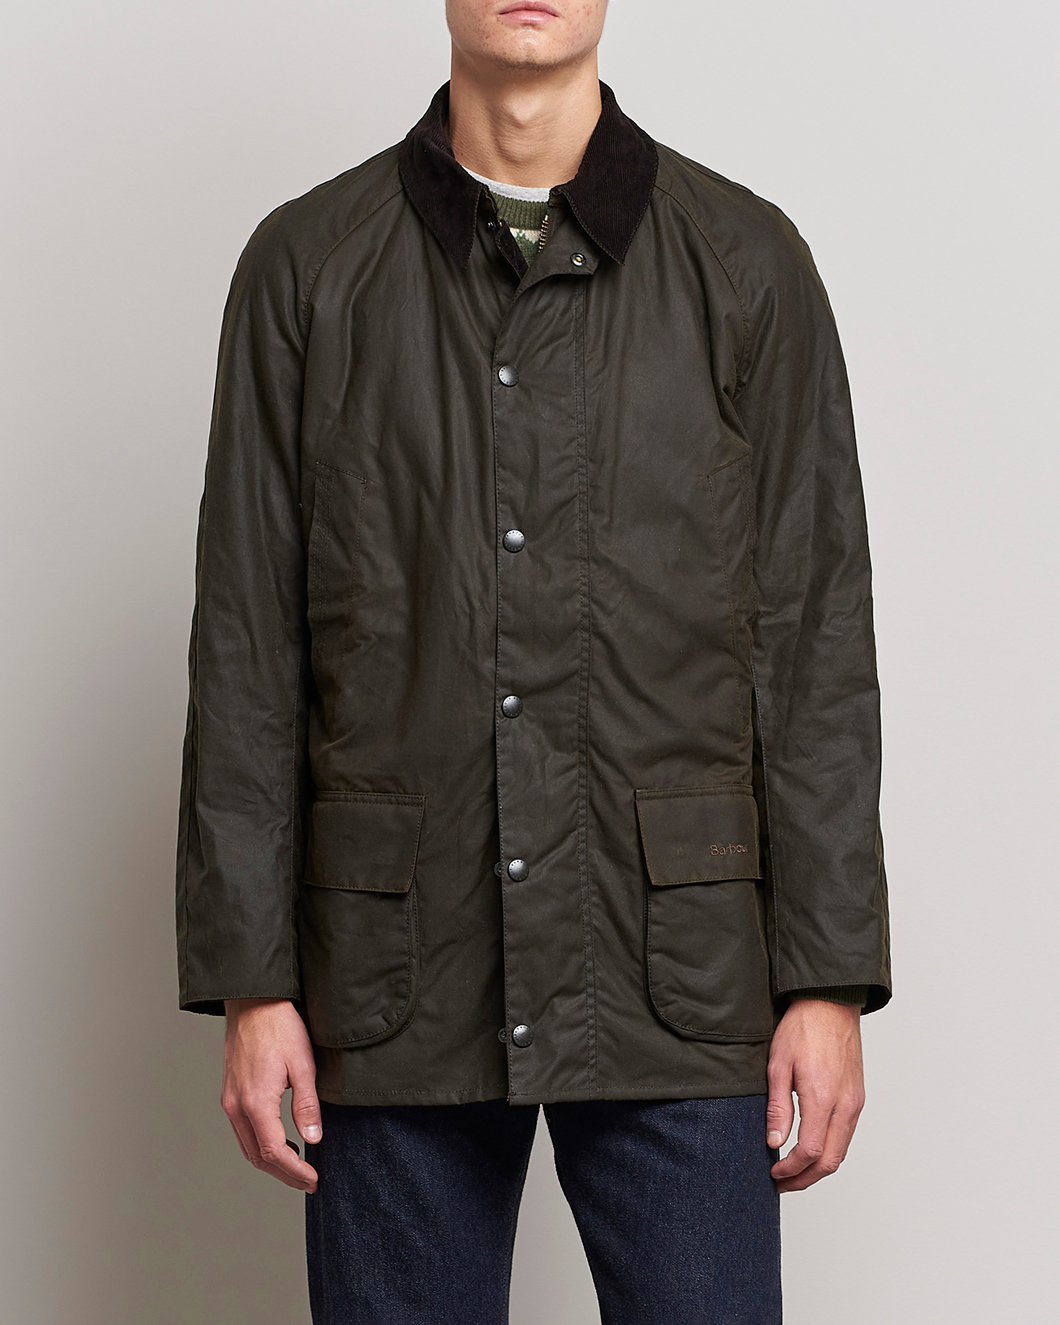 Herr | The Classics of Tomorrow | Barbour Lifestyle | Bristol Jacket Olive